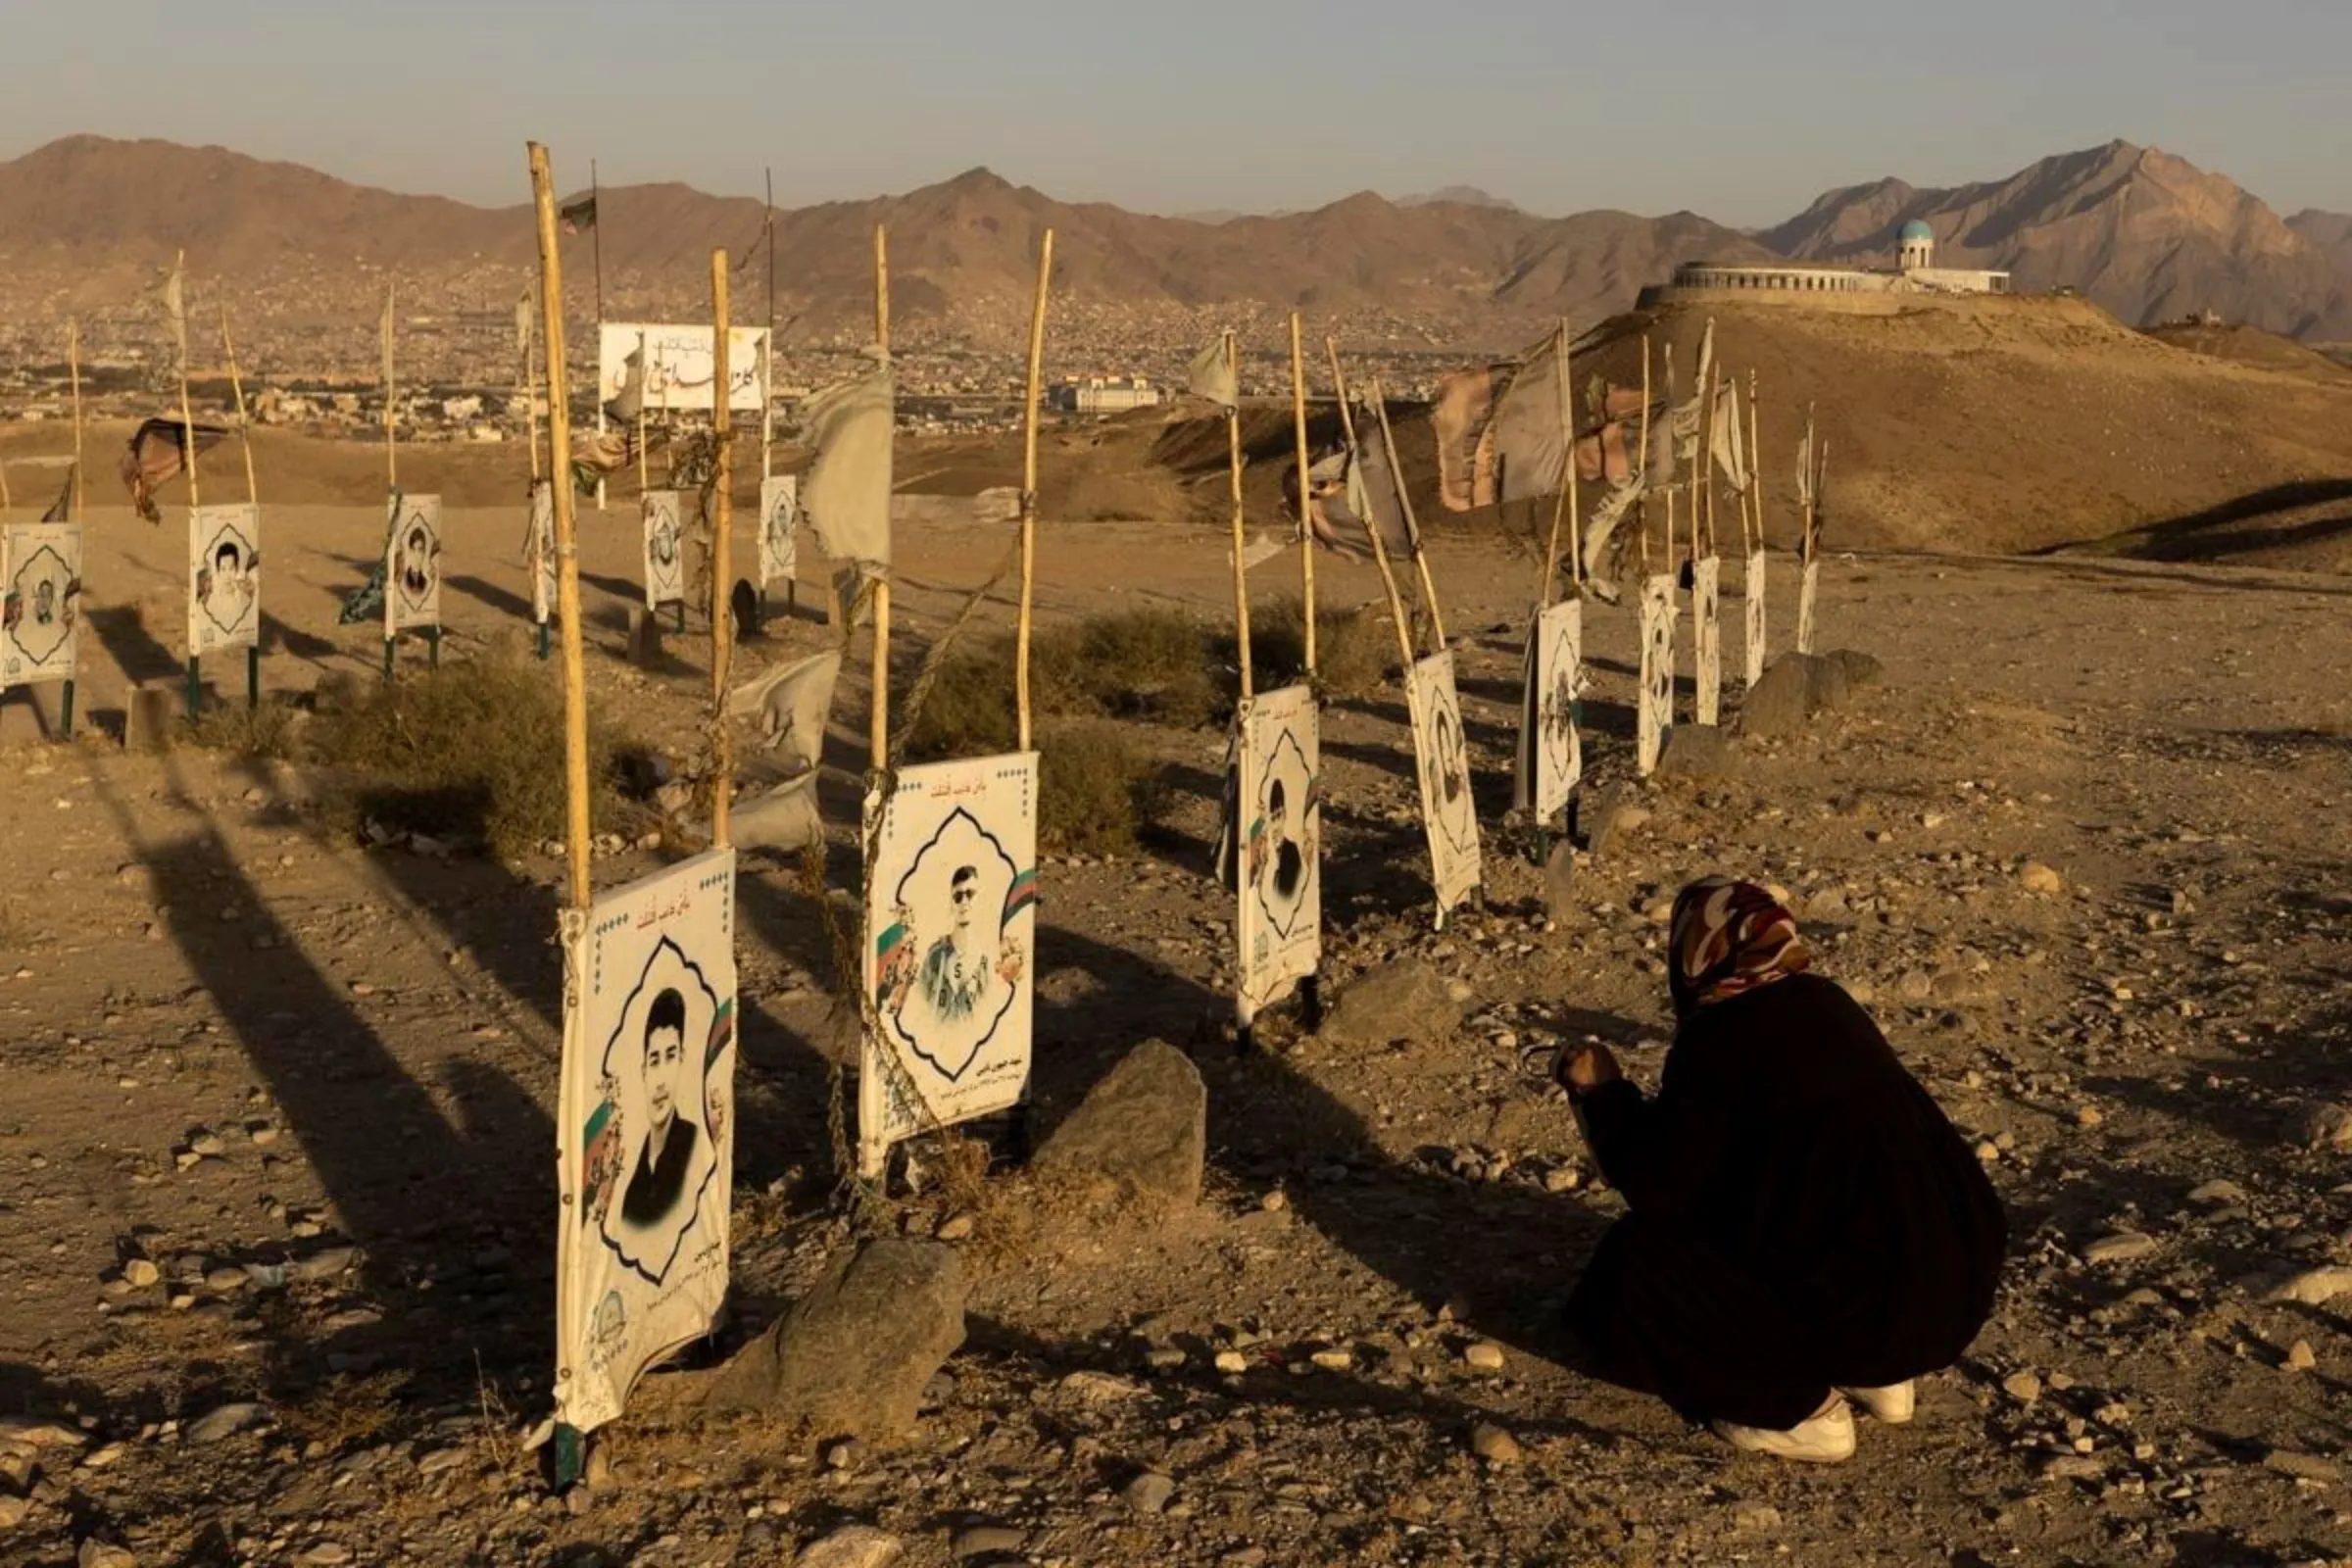 A woman prays in front of the graves at a Hazara cemetery for the Shi'ite community martyrs on a hill on the outskirts of Kabul, Afghanistan October 20, 2021.  REUTERS/Jorge Silva